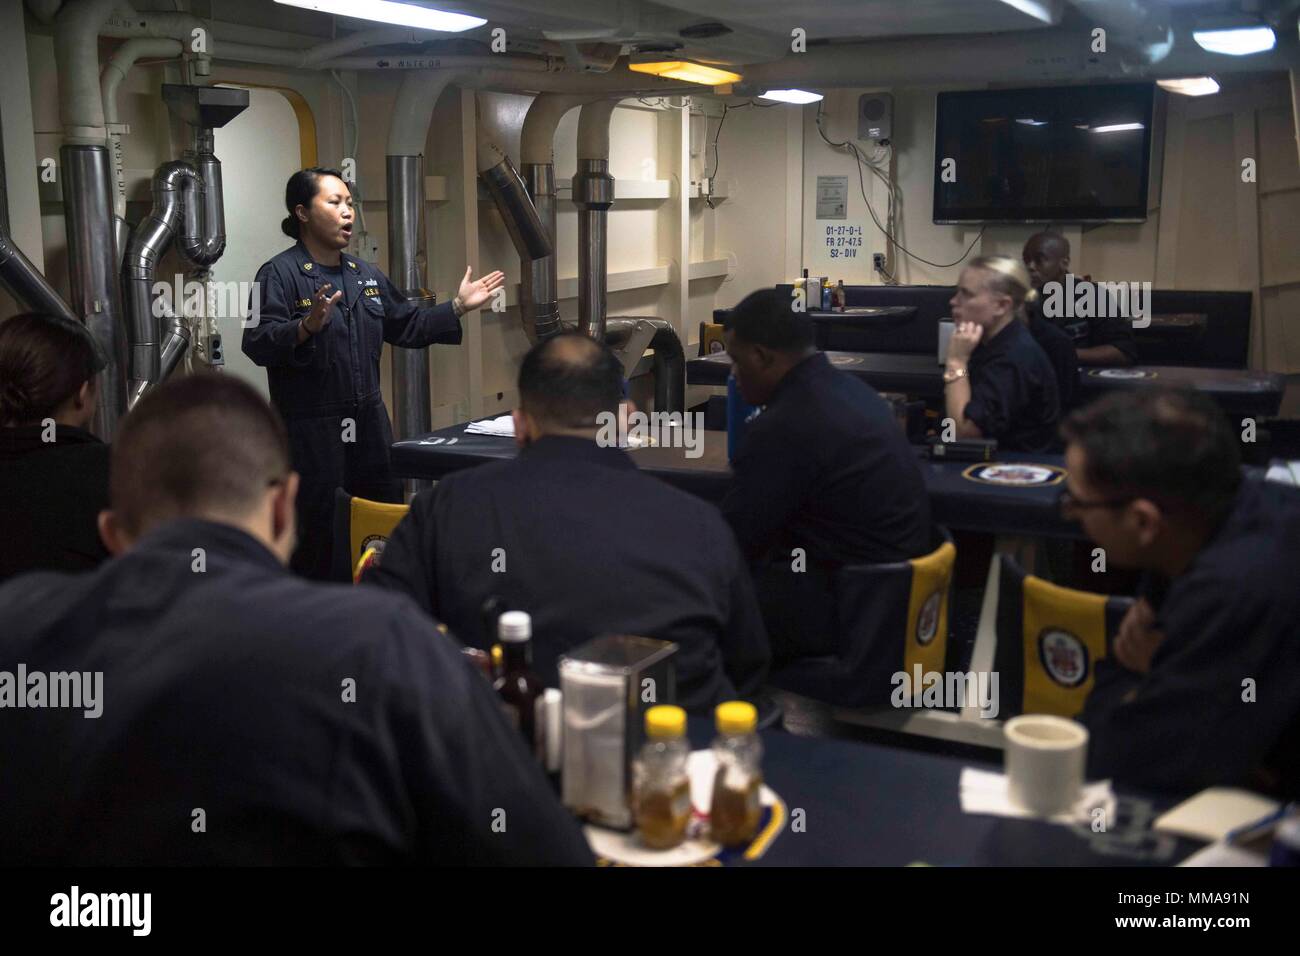 170927-N-BK384-106 MEDITERRANEAN SEA (Sept. 27, 2017) Chief Damage Controlman Susan Dang, from Thornton, Colorado, briefs the damage control training team on the mess decks aboard the San Antonio-class amphibious transport dock ship USS San Diego (LPD 22) Sept. 27, 2017. San Diego is deployed with the America Amphibious Ready Group and the 15th Marine Expeditionary Unit to support maritime security and theater security cooperation in efforts in the U.S. 6th Fleet area of operations. (U.S. Navy photo by Mass Communication Specialist 3rd Class Justin A. Schoenberger/Released) Stock Photo